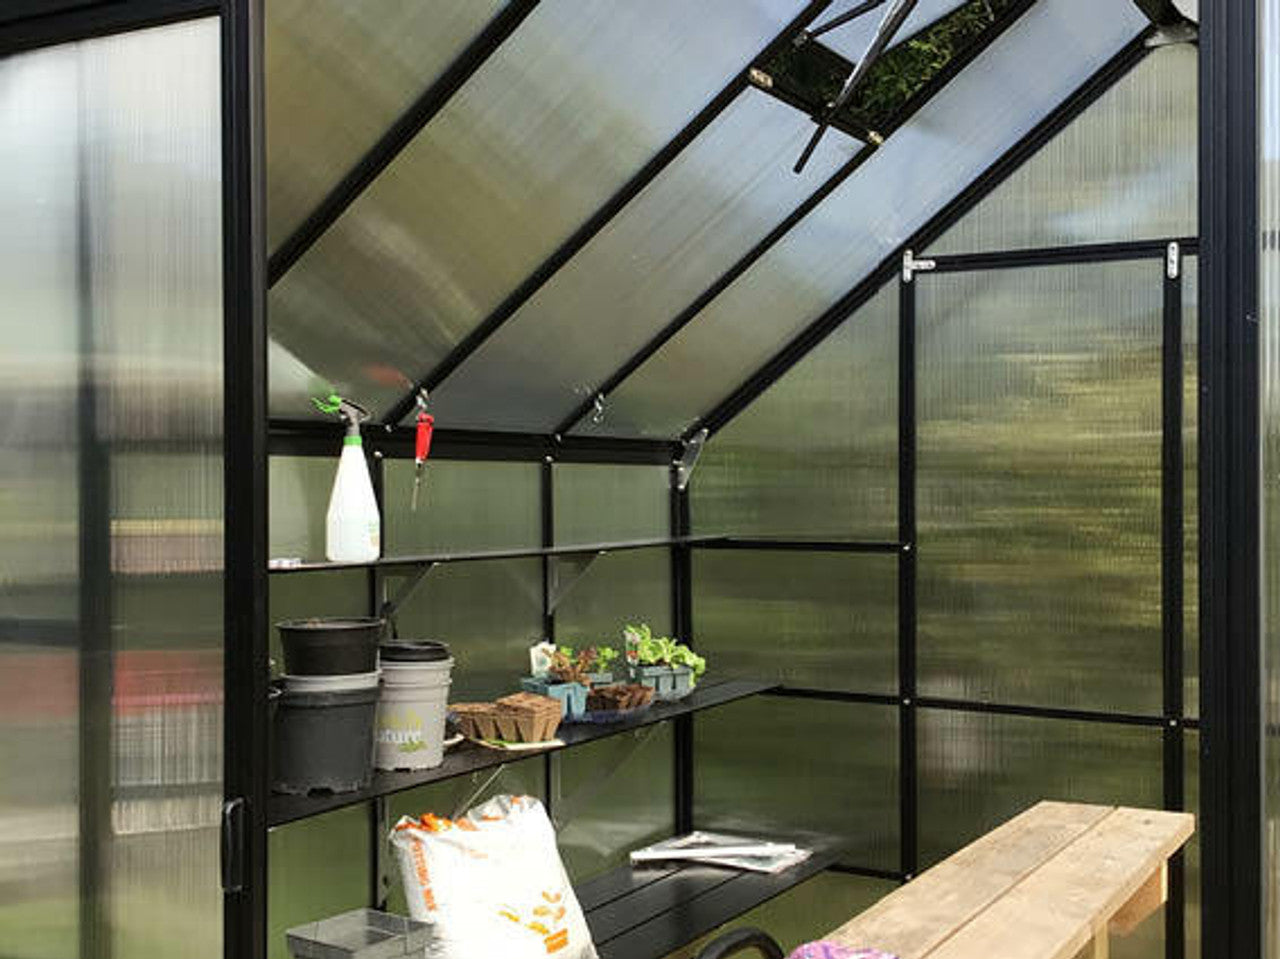 2.6m x 2.6m black framed polycarbonate greenhouse with staging shelving inside showing seedlings and pot storage 